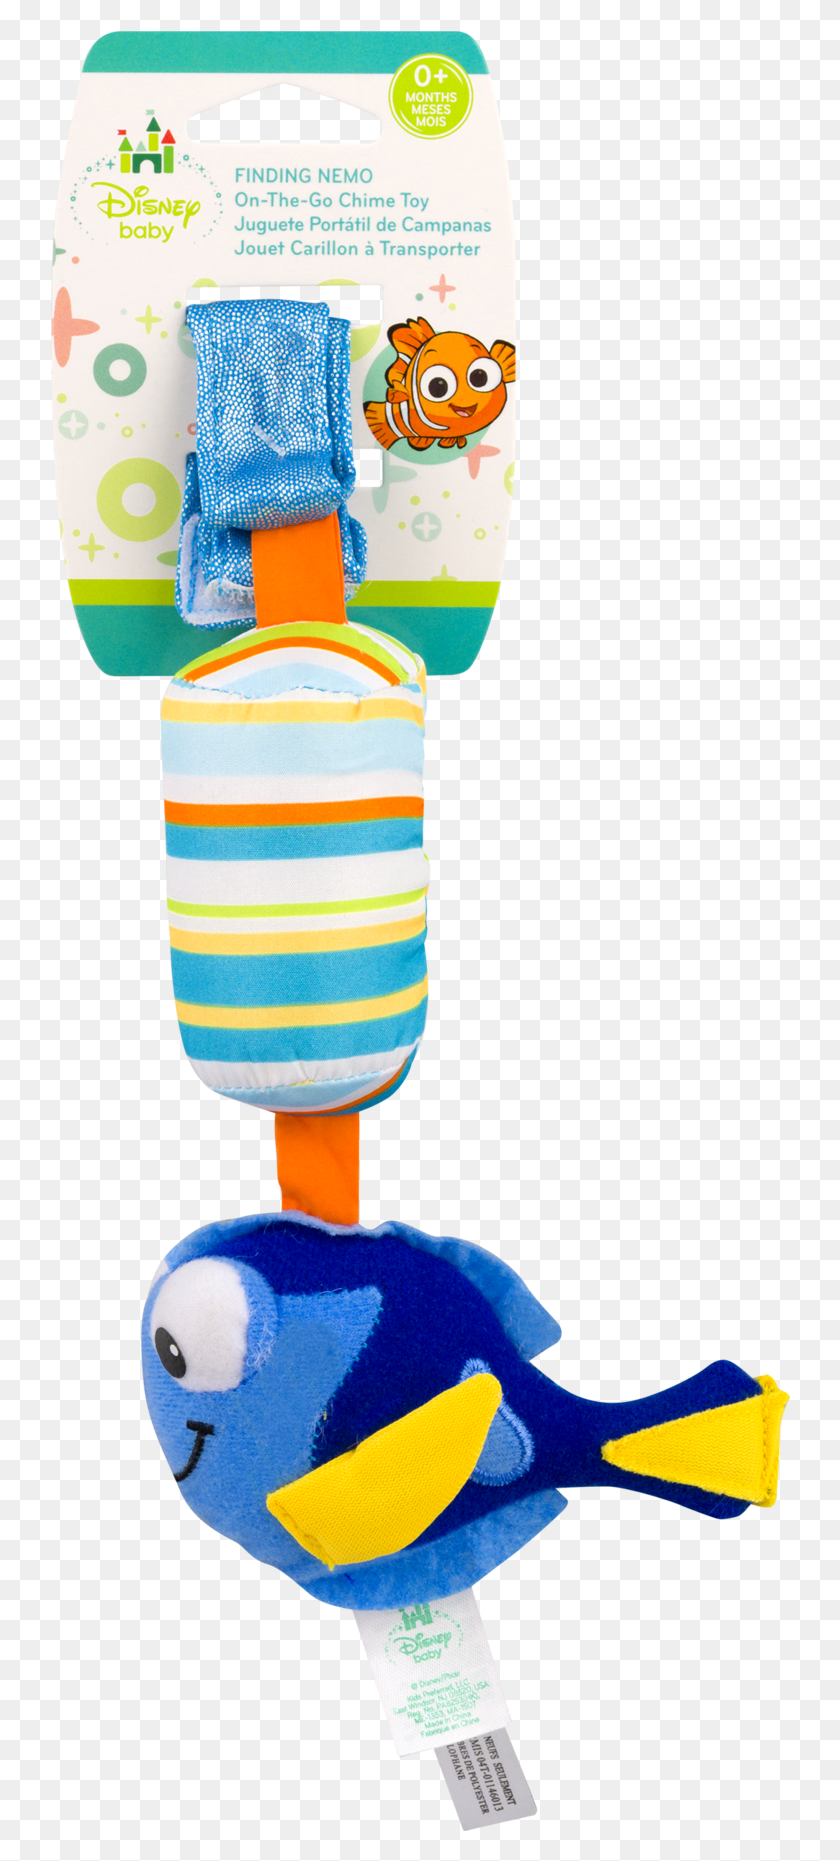 740x1801 Disney Baby Finding Nemo On The Go Chime Toy 0 Месяцев Мягкая Игрушка, Одежда, Одежда, Напитки Hd Png Скачать